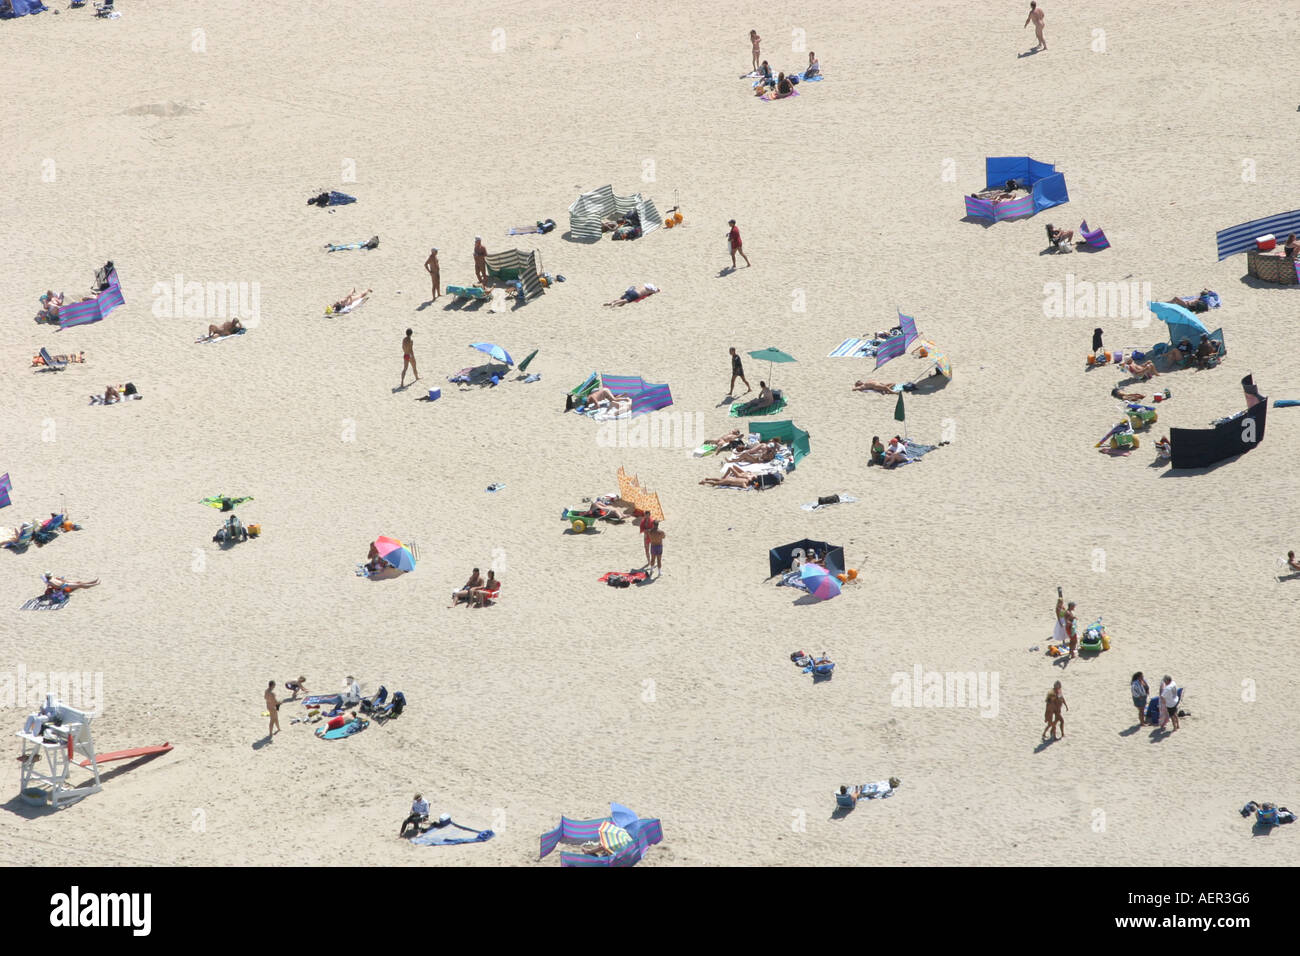 Aerial view of nude beach at Sandy Hook National Recreation Area, New Jersey, U.S.A Stock Photo picture picture